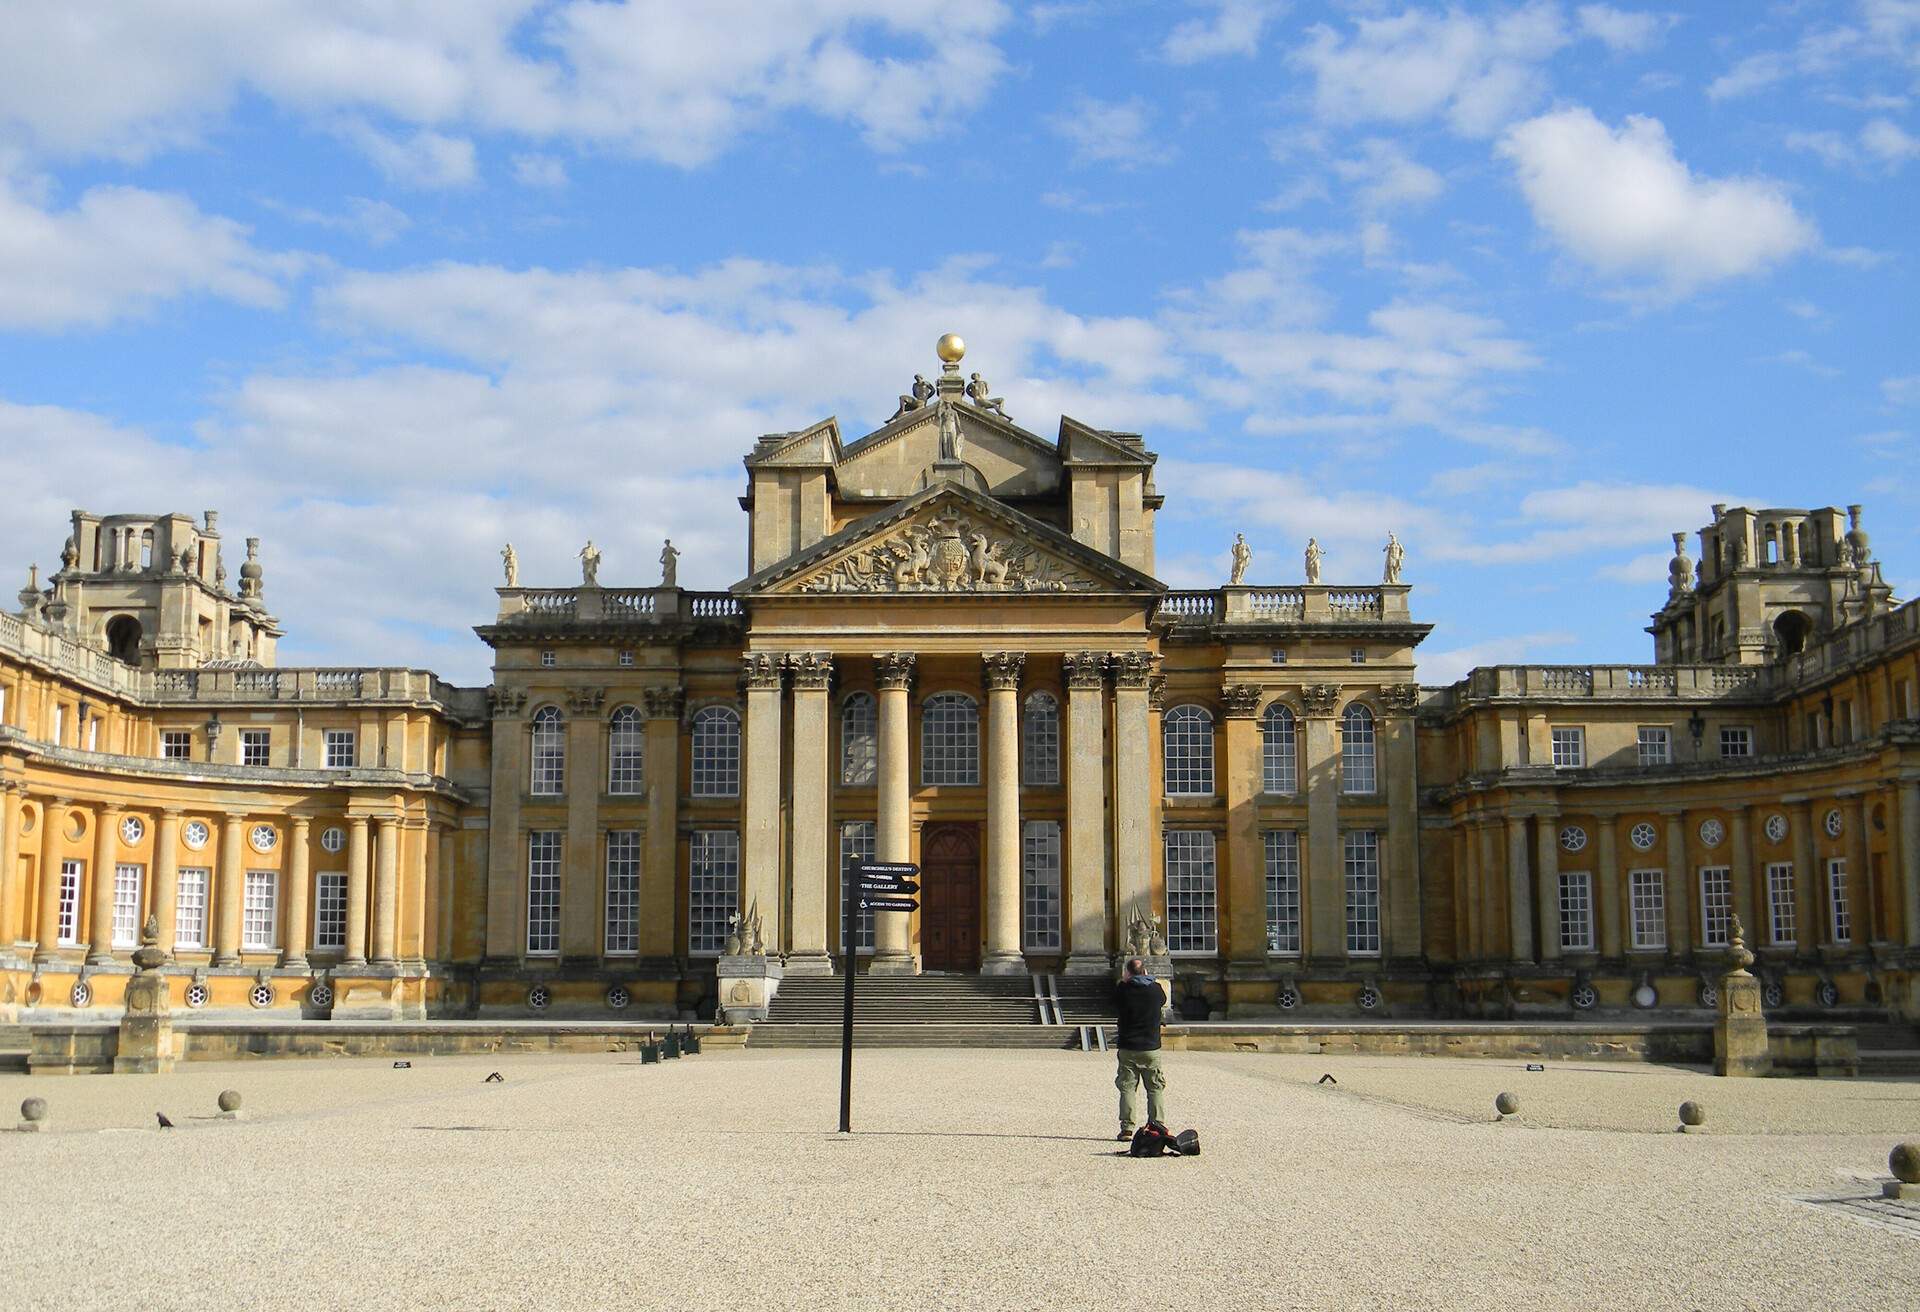 A person standing on gravel is photographing the huge, baroque-style English palace.